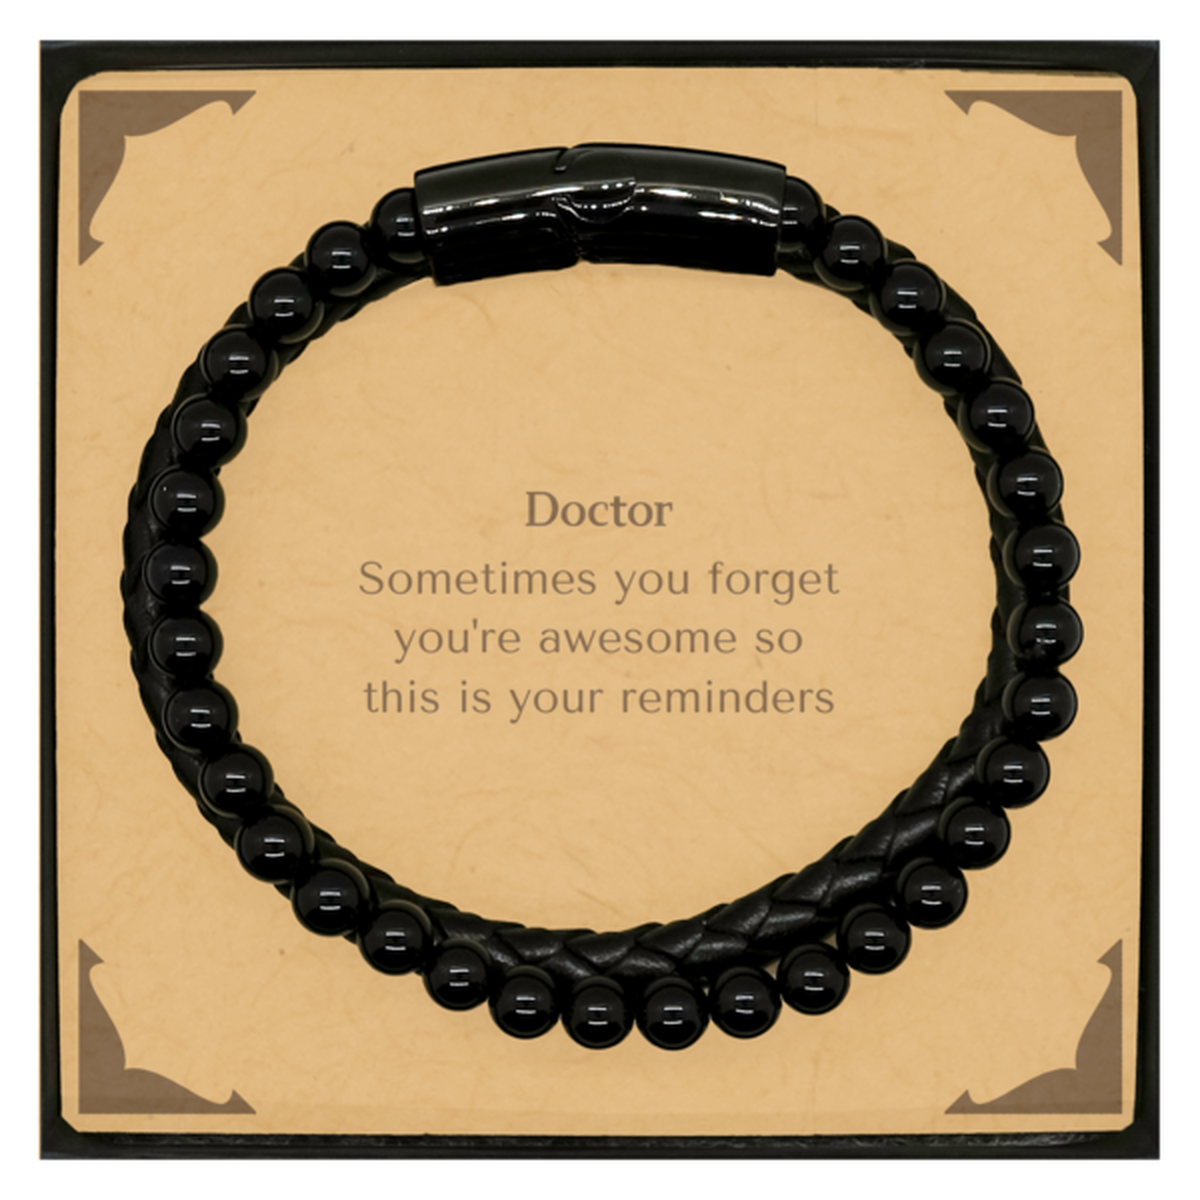 Sentimental Doctor Stone Leather Bracelets, Doctor Sometimes you forget you're awesome so this is your reminders, Graduation Christmas Birthday Gifts for Doctor, Men, Women, Coworkers